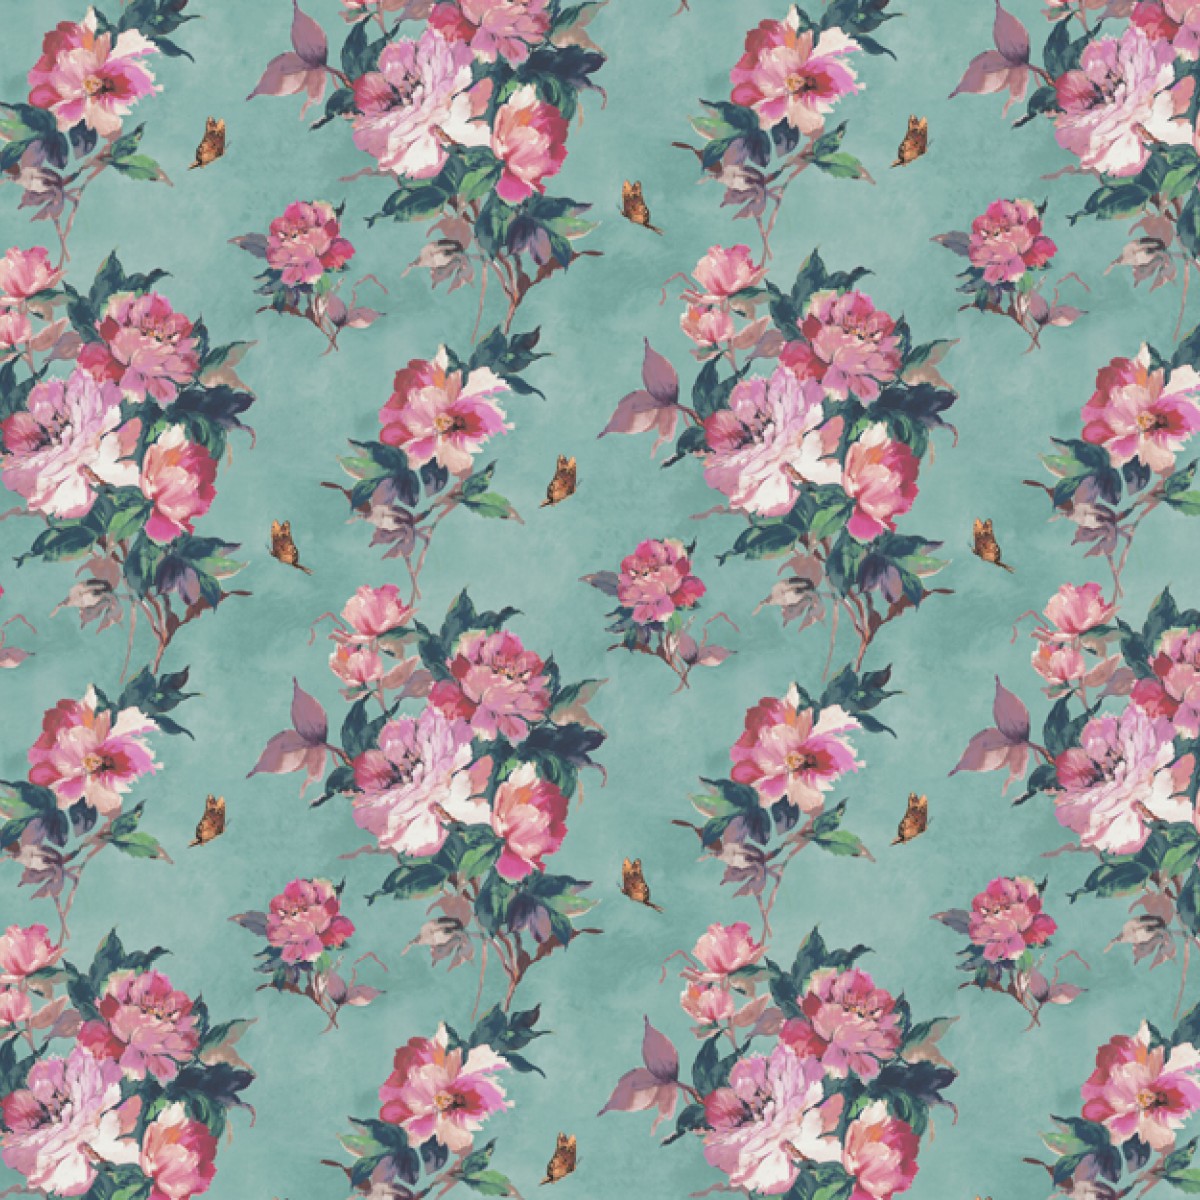 Tapet Madama Butterfly, Teal Green Luxury Floral, 1838 Wallcoverings, 5.3mp / rola, Tapet living 